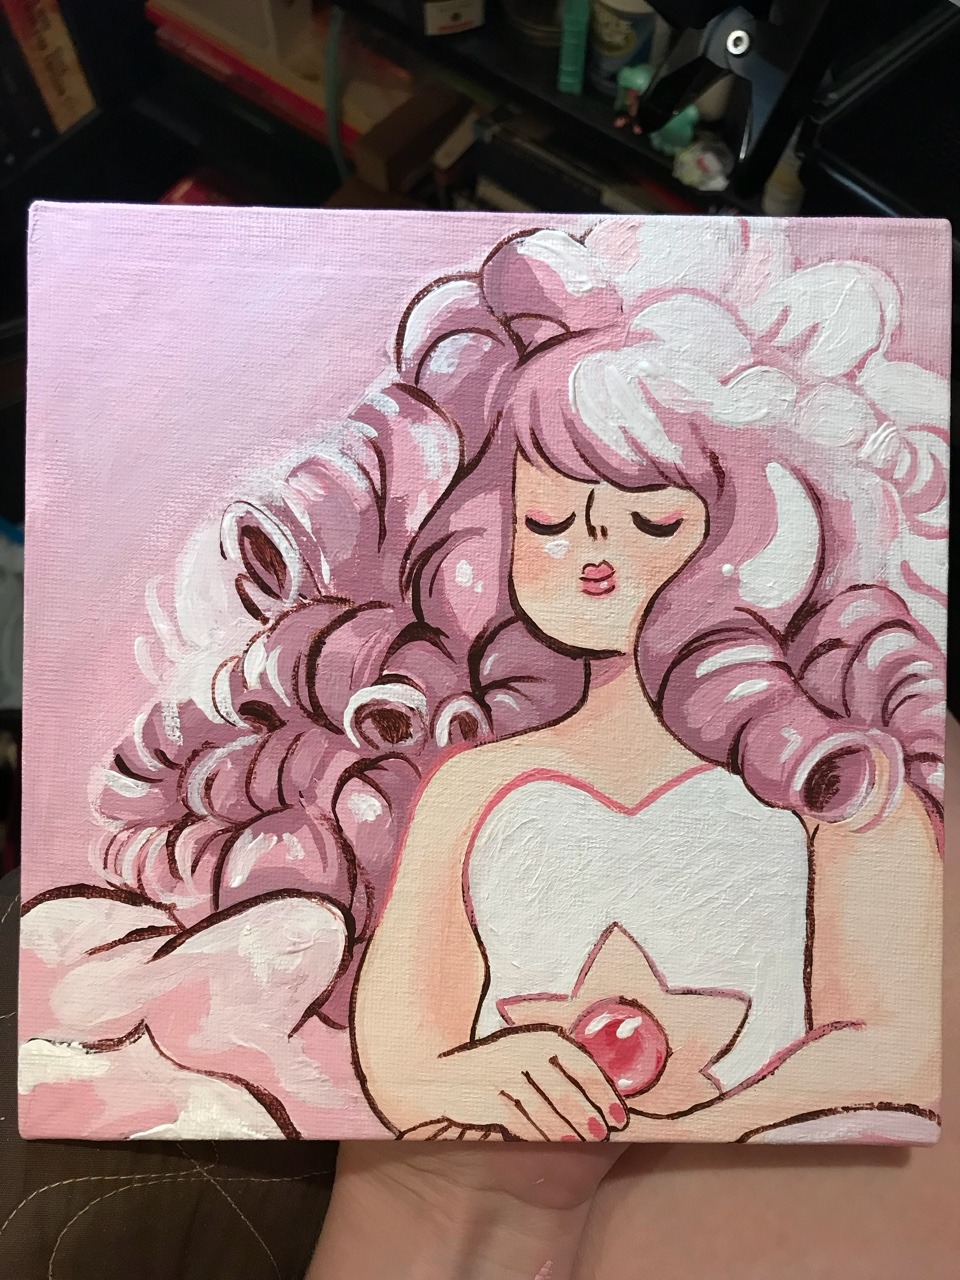 I copied the portrait of Rose Quartz from above Steven’s front door as a surprise gift for my boyfriend’s three little girls :) theyre all fans of the show and were super excited when they found out I...